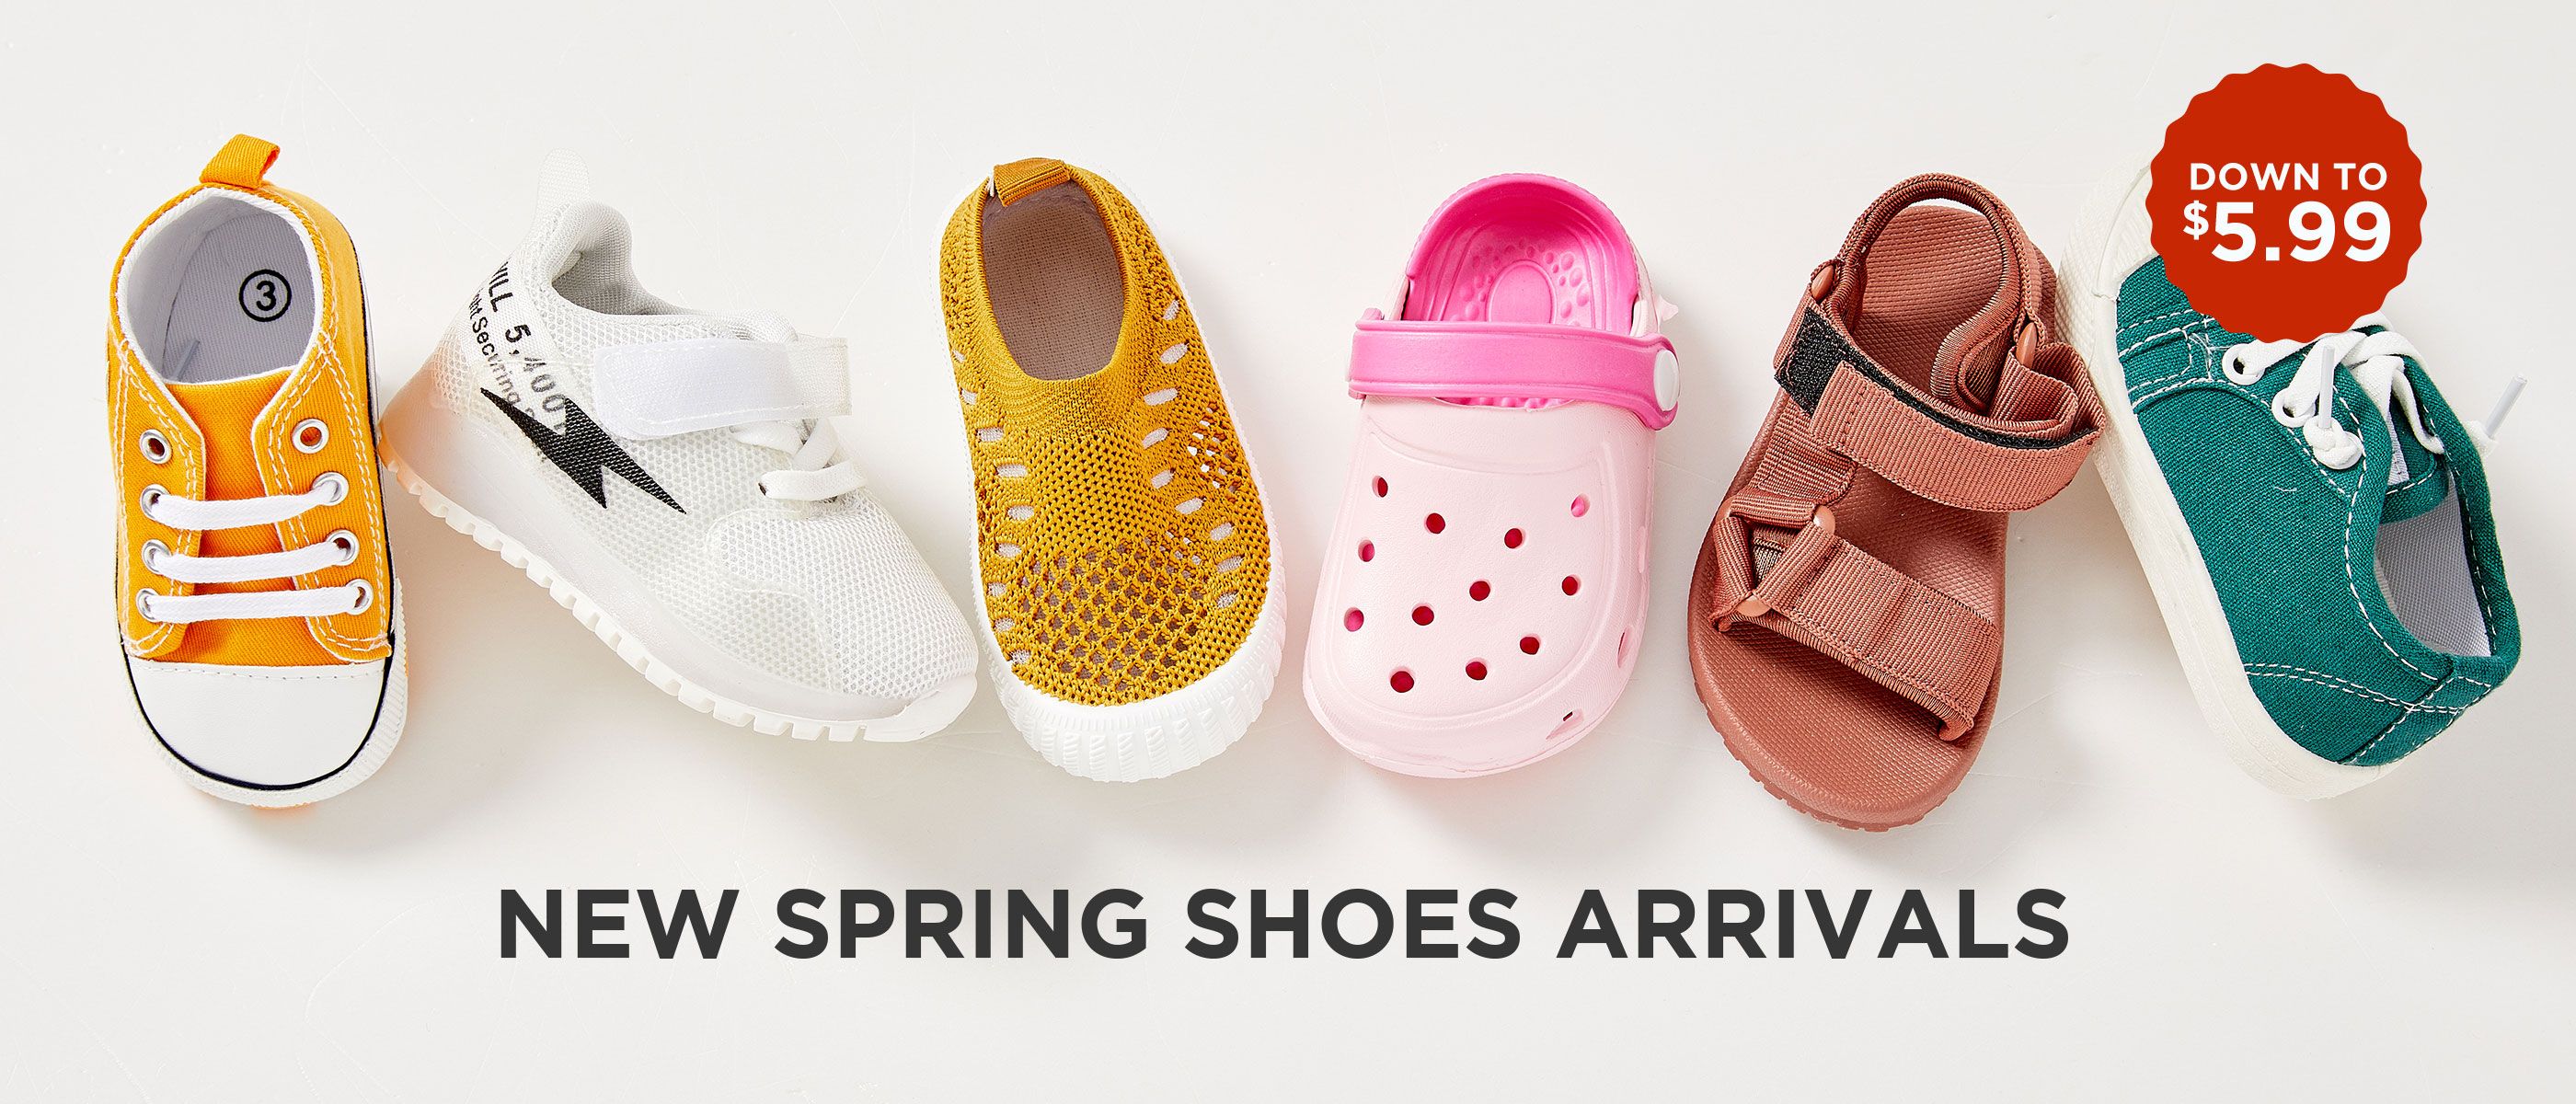 New Spring Shoes Arrivals